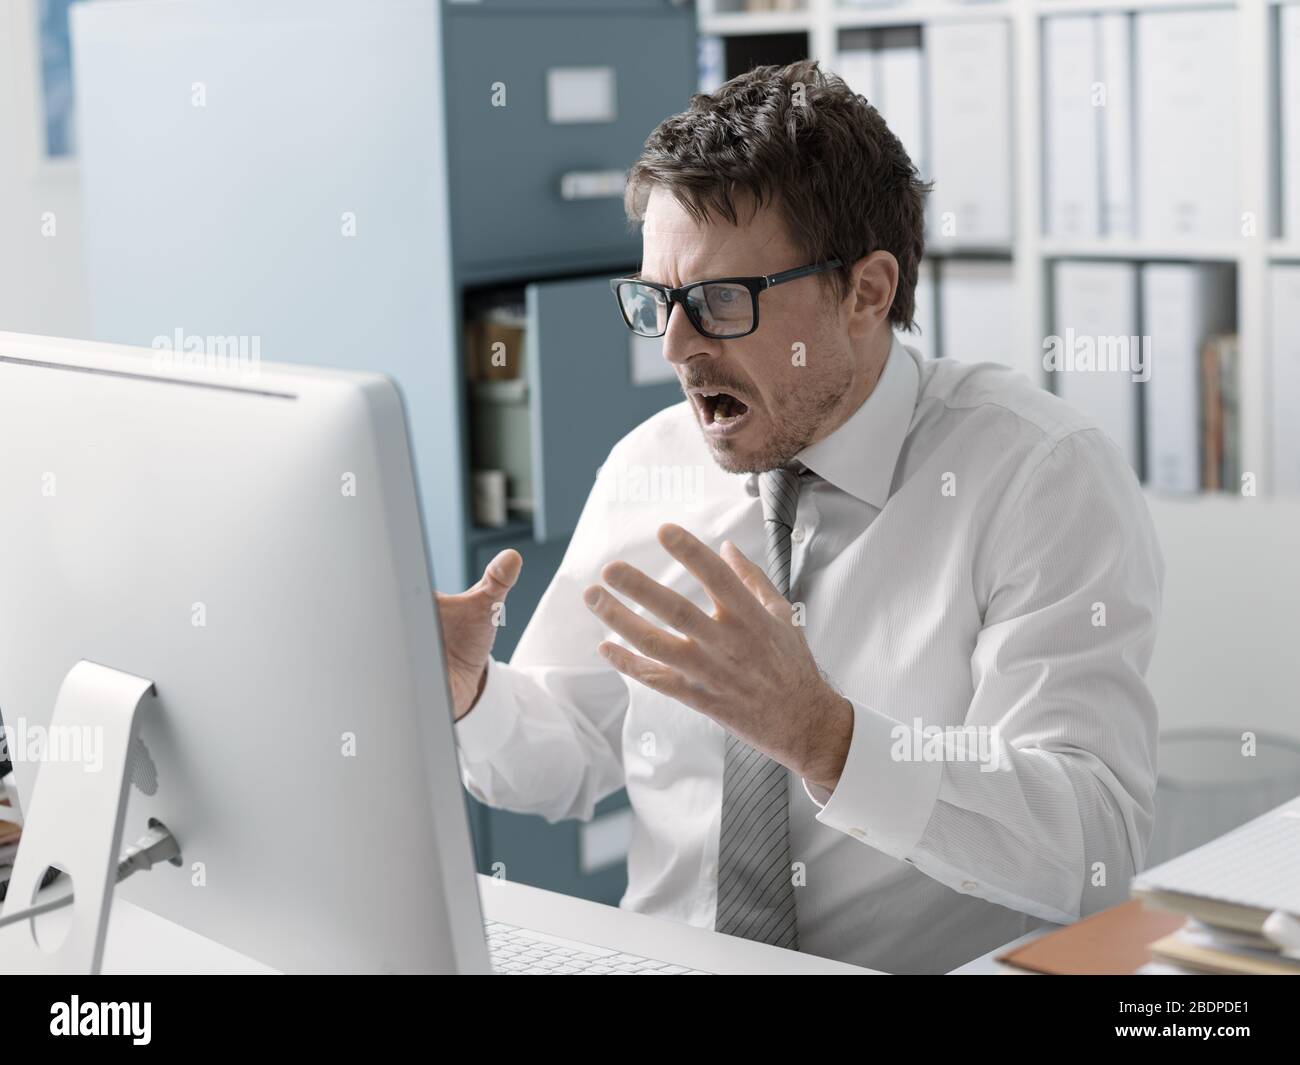 Angry business executive shouting at the computer, stressful job and system failure concept Stock Photo